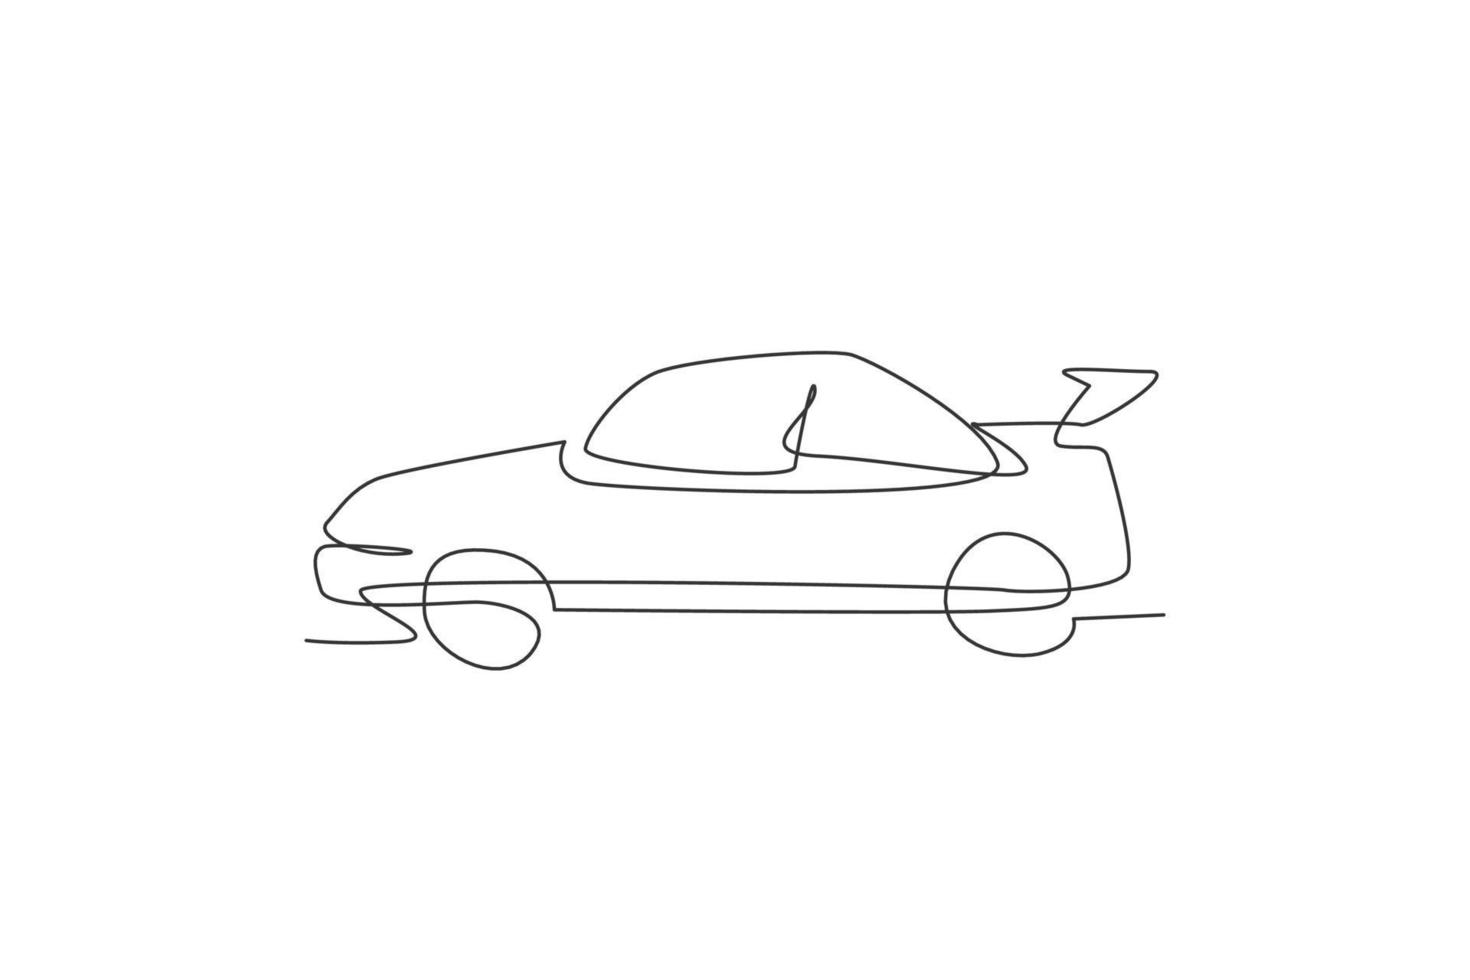 Single continuous line drawing of classic sedan car from side view. Transportation road vehicle concept. Trendy one line draw design vector graphic illustration